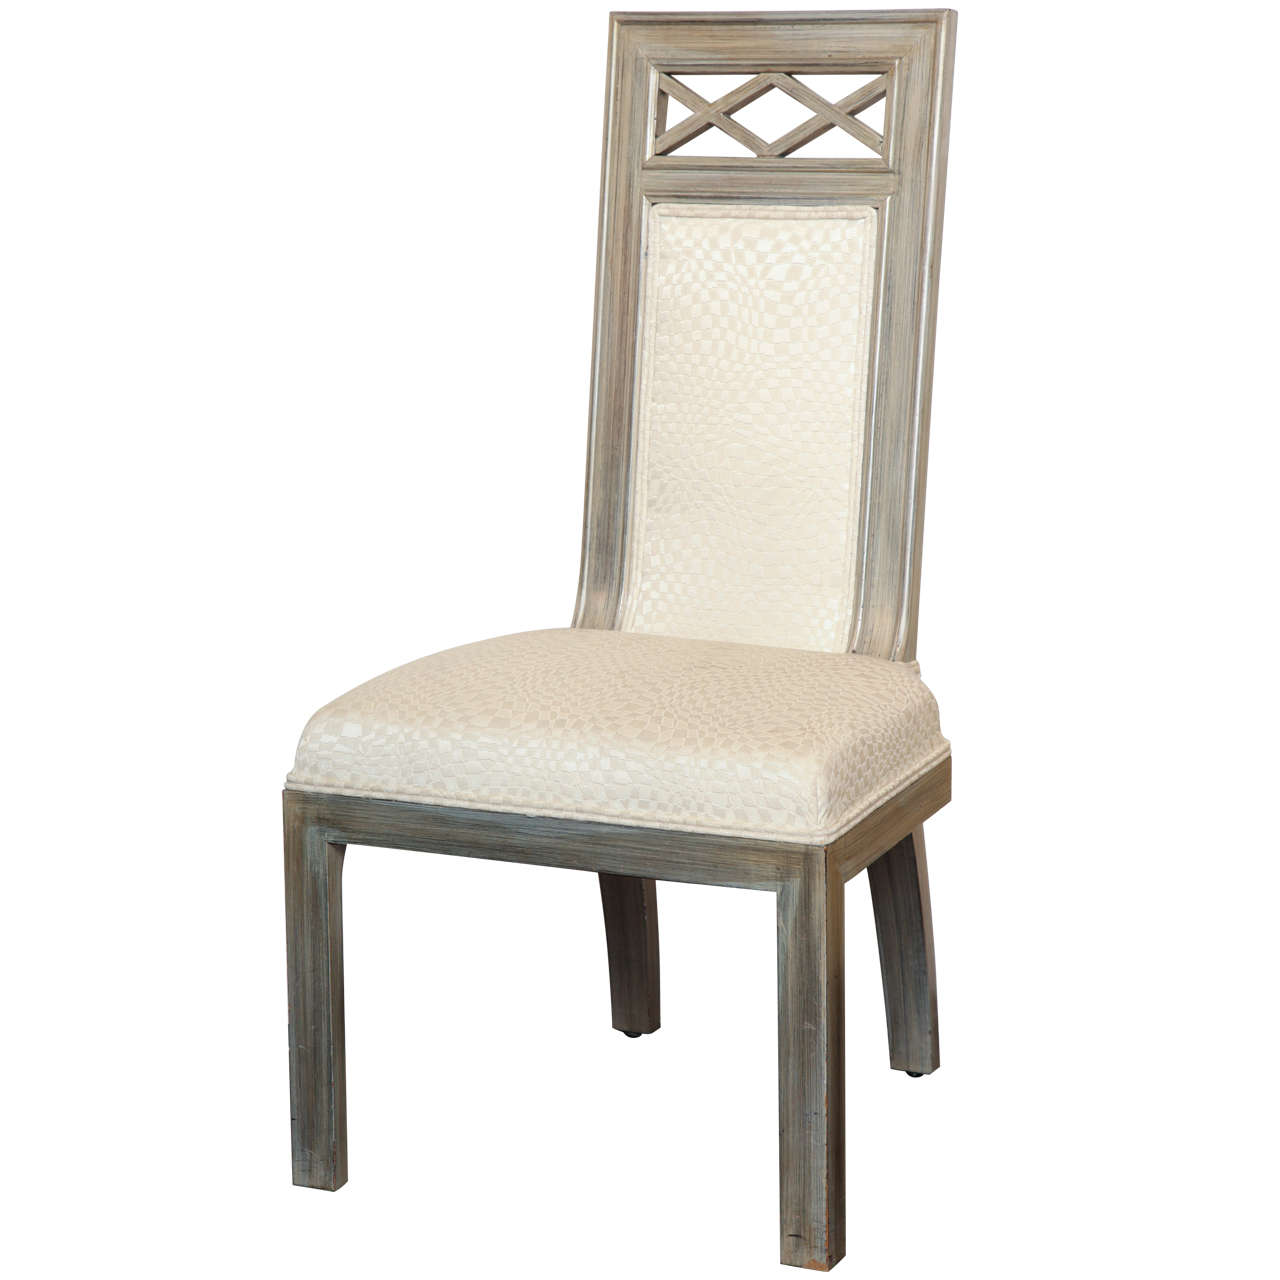 Unique Upholstered James Mont Side Chair in Silver Leaf